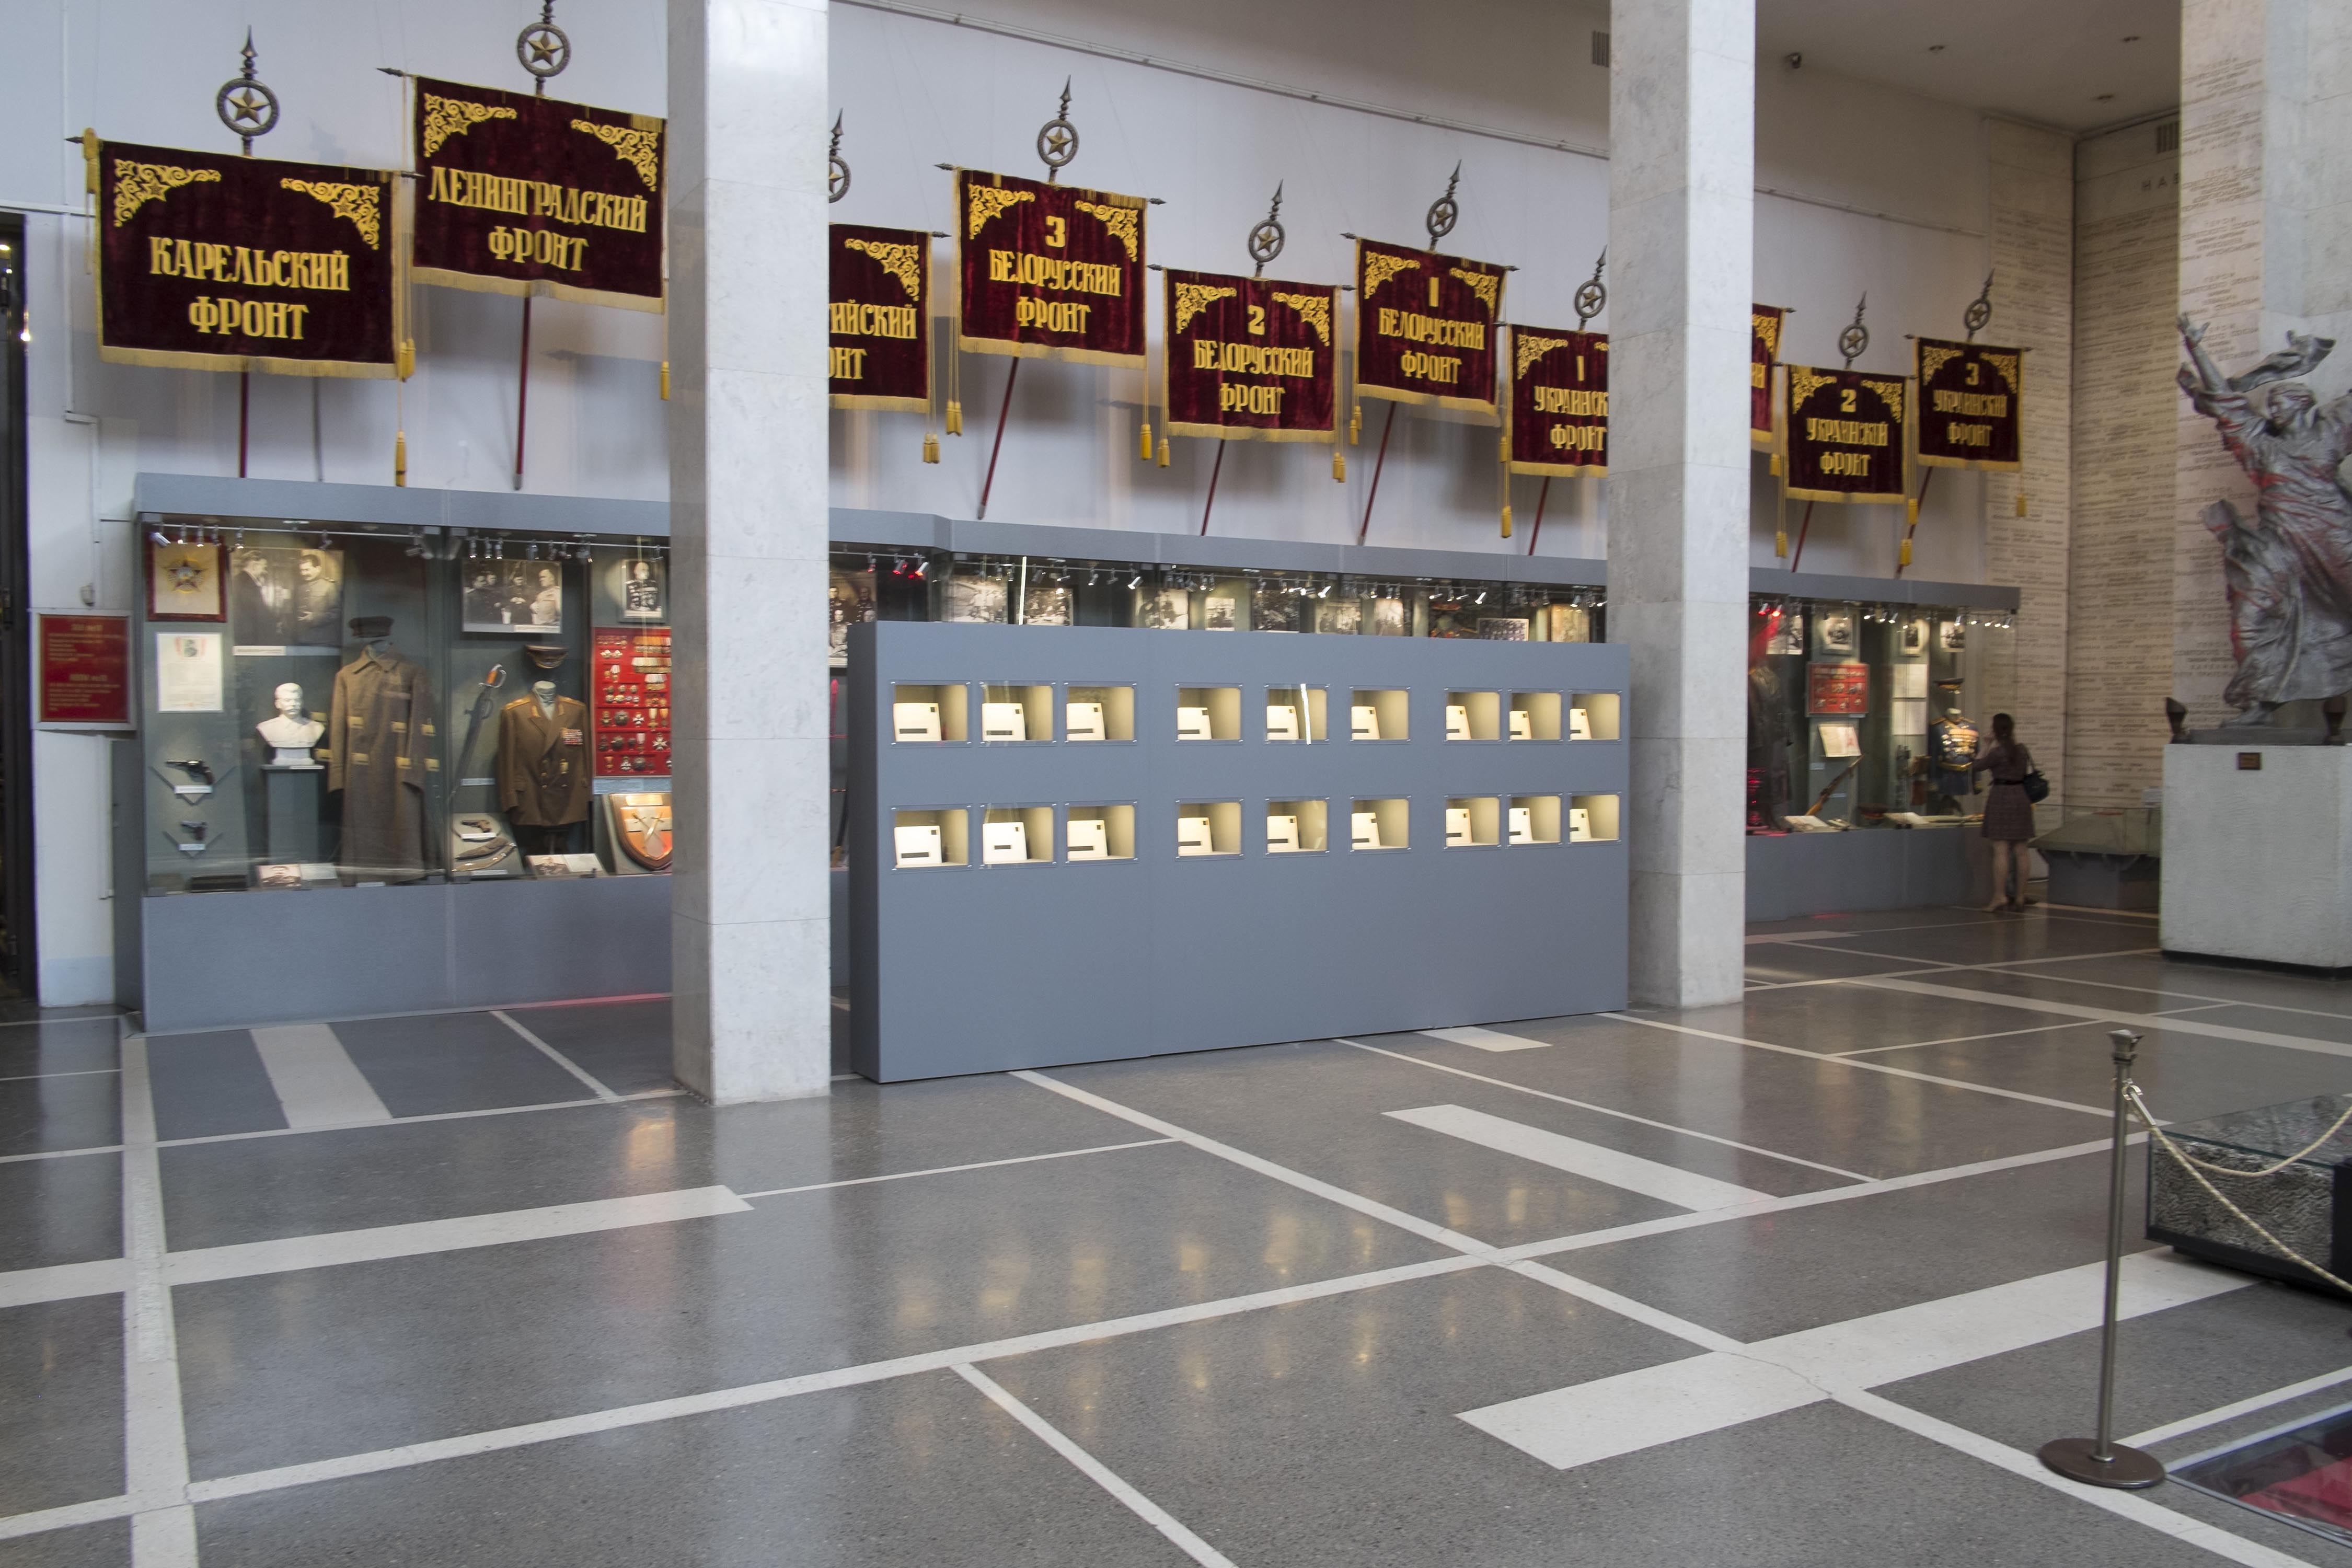 Beyond Visual Range, Inventory Cards, installation view, Armed Forces Museum Moscow, Image courtesy of the artist, 2014.